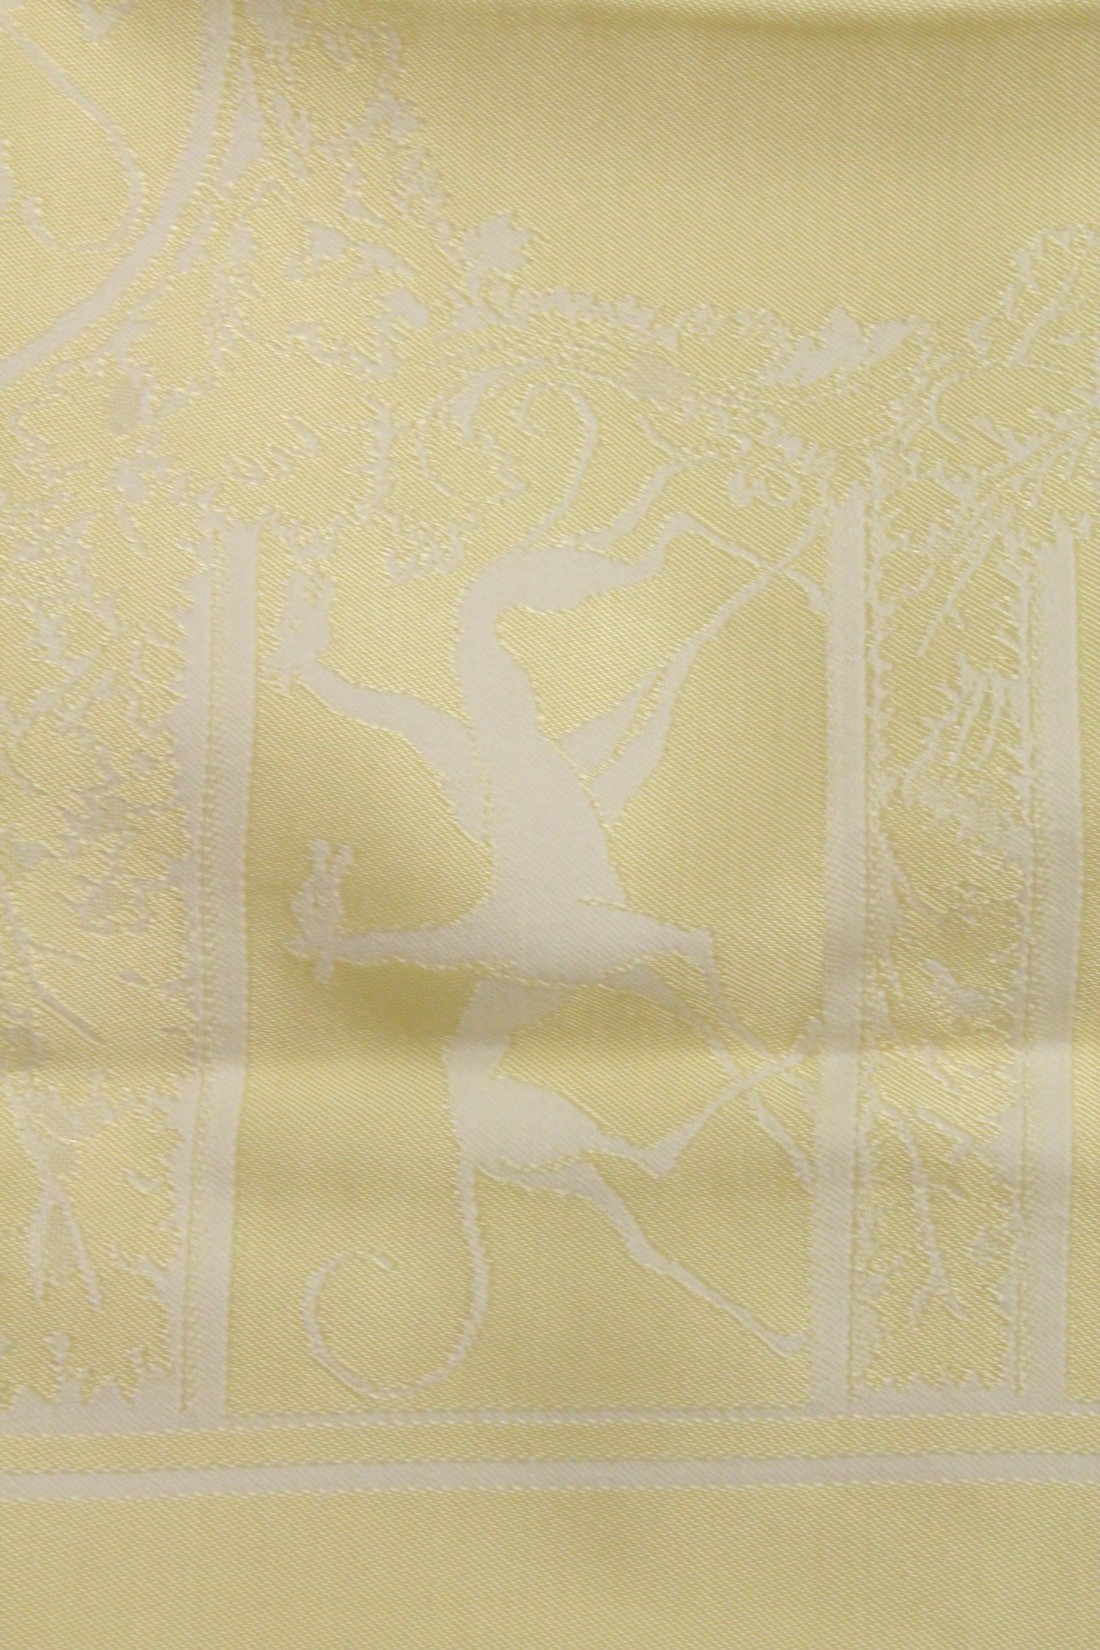 A YELLOW TABLECLOTH WITH MATCHING NAPKINS. - Image 4 of 4